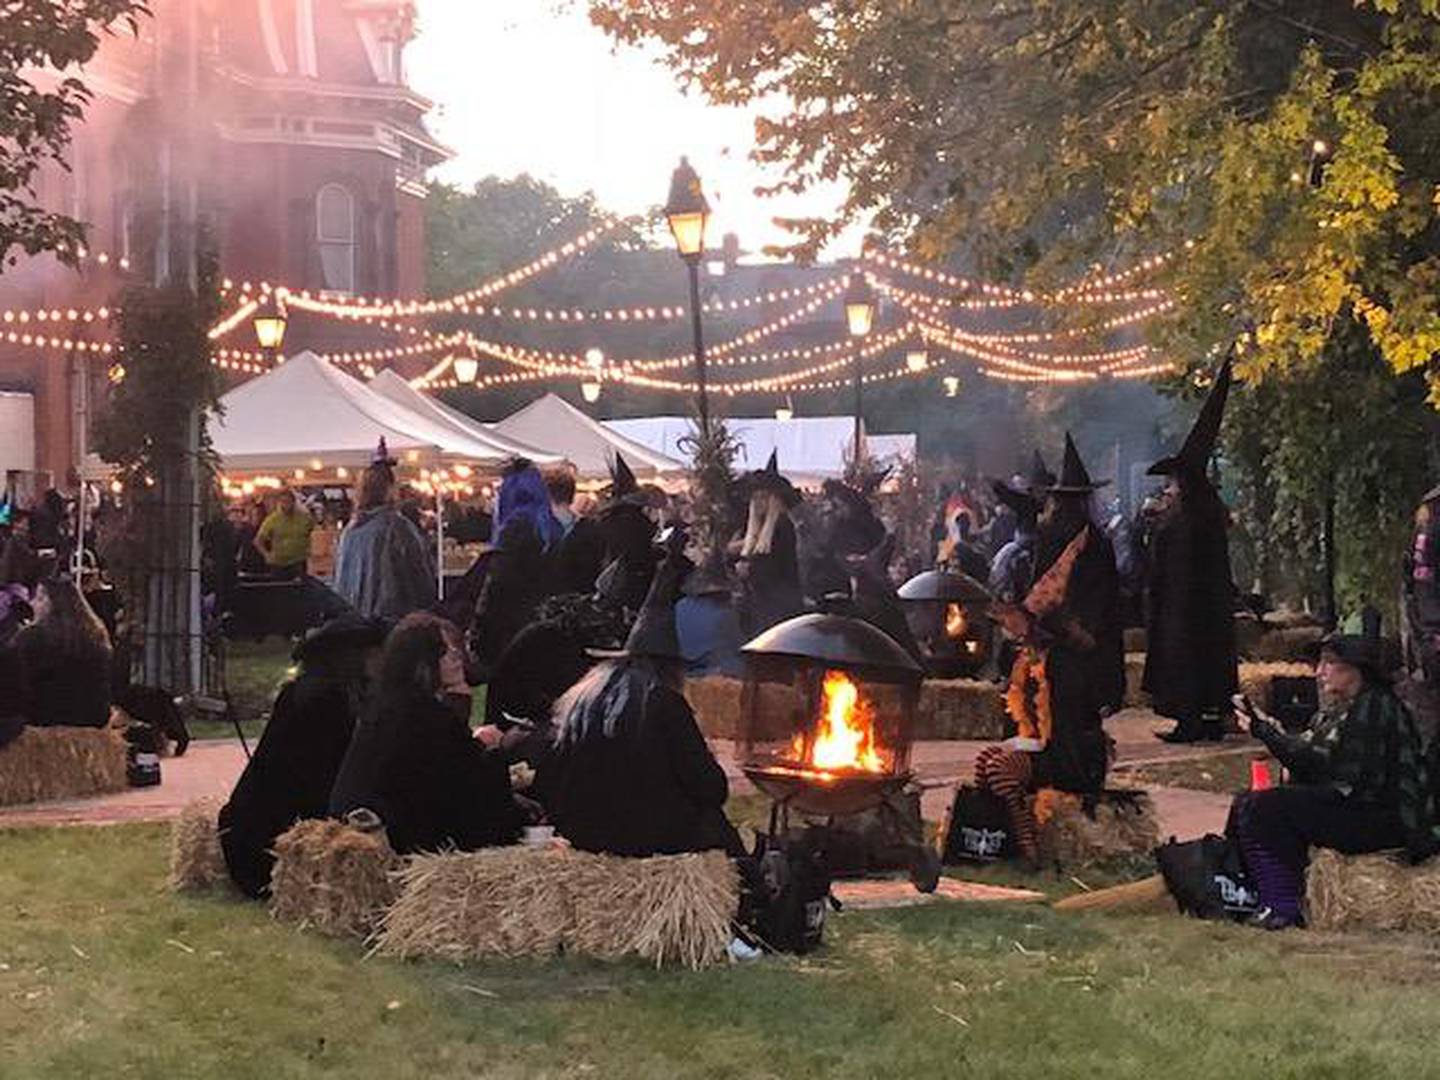 Women, dressed as witches, sit around a fire in the courtyard during Witches Night Out Thursday night in Joliet.